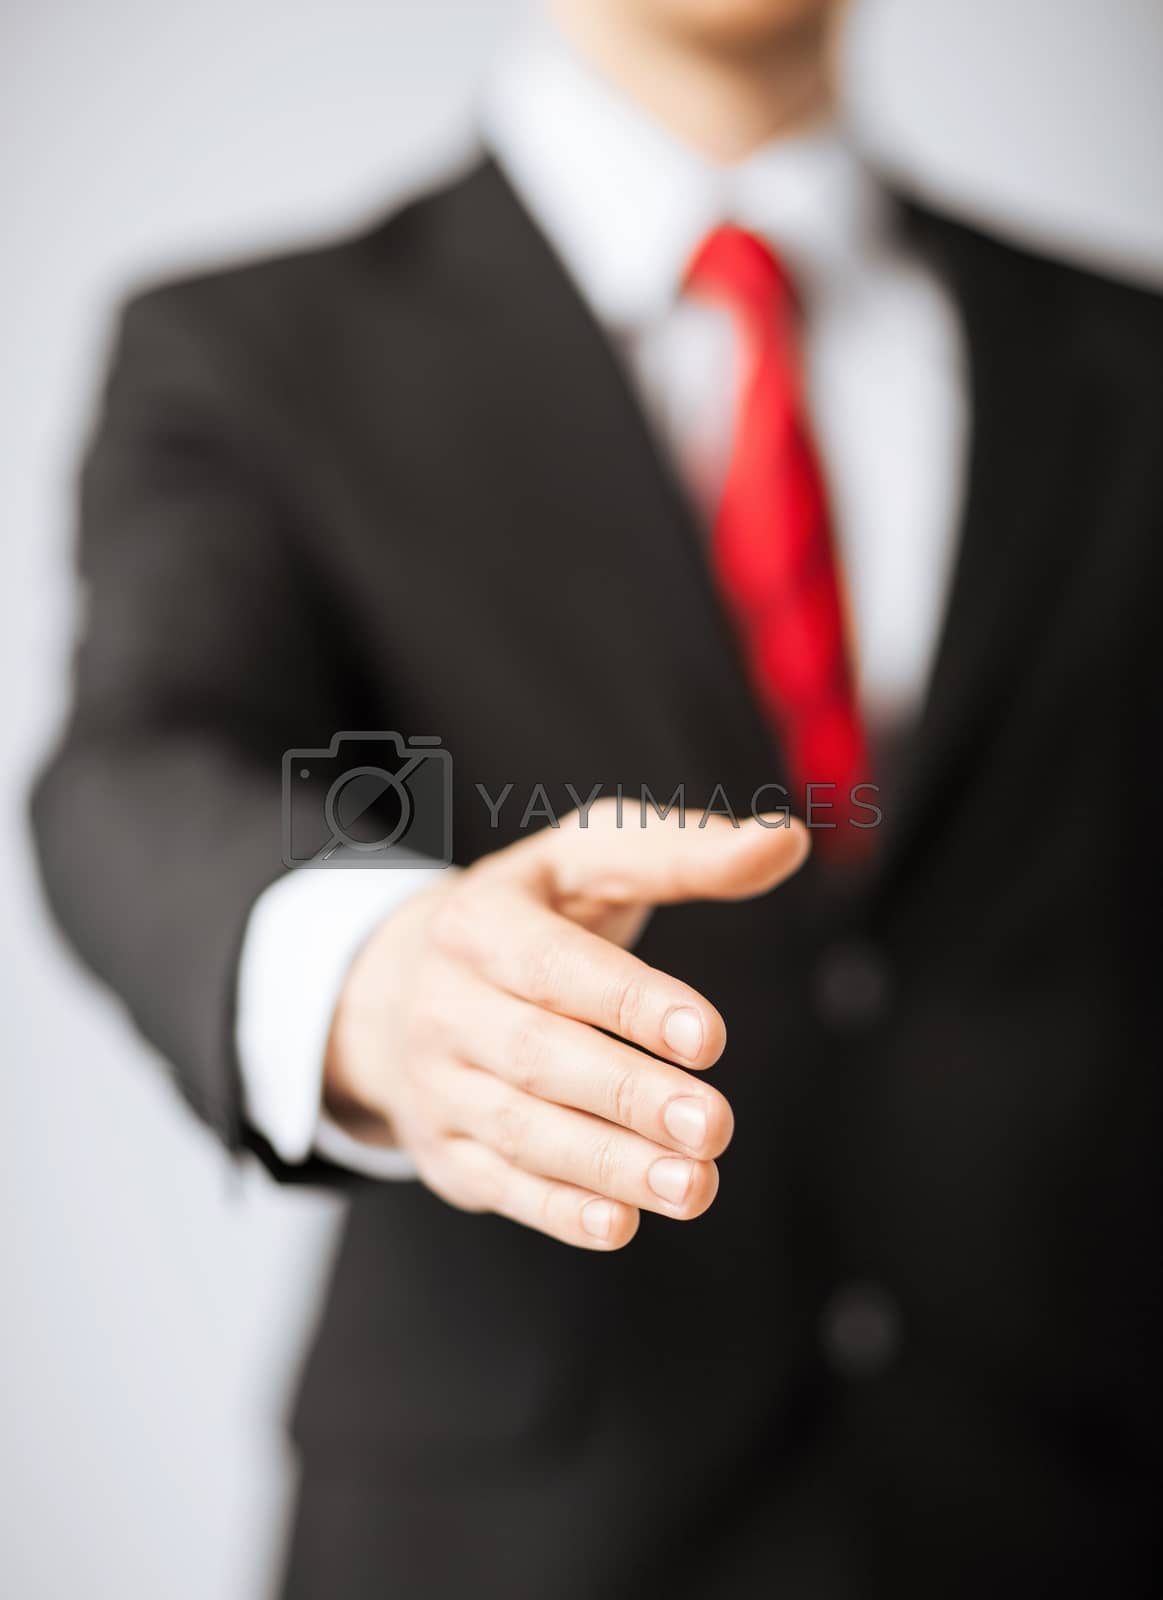 Royalty free image of businessman with open hand by dolgachov